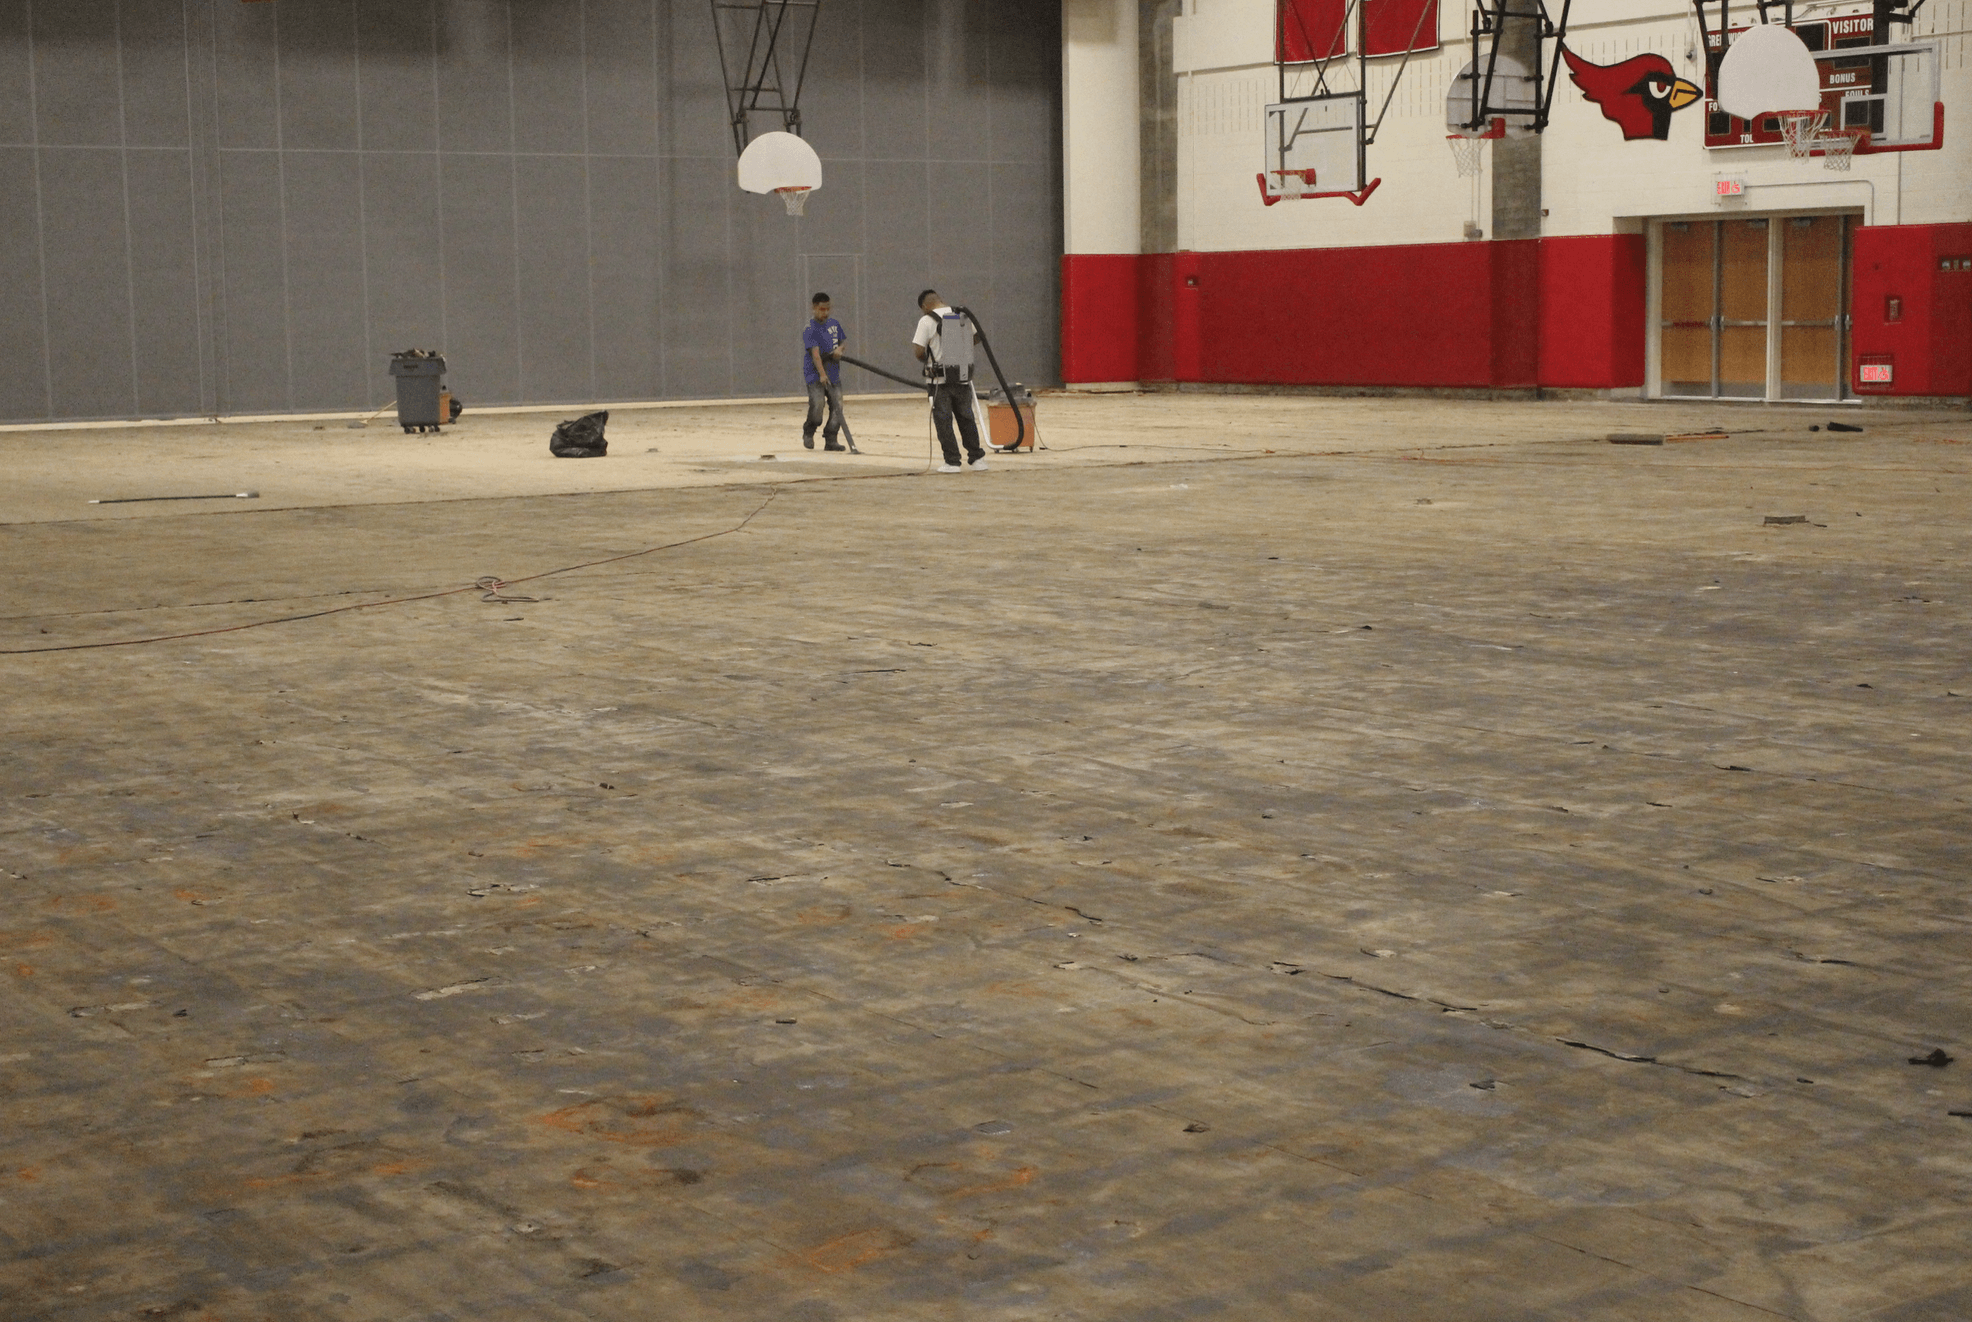 Employees of Dalene Flooring work on the gymnasium floor at GHS the second week of school. Sept 2017 Photo: Leslie Yager